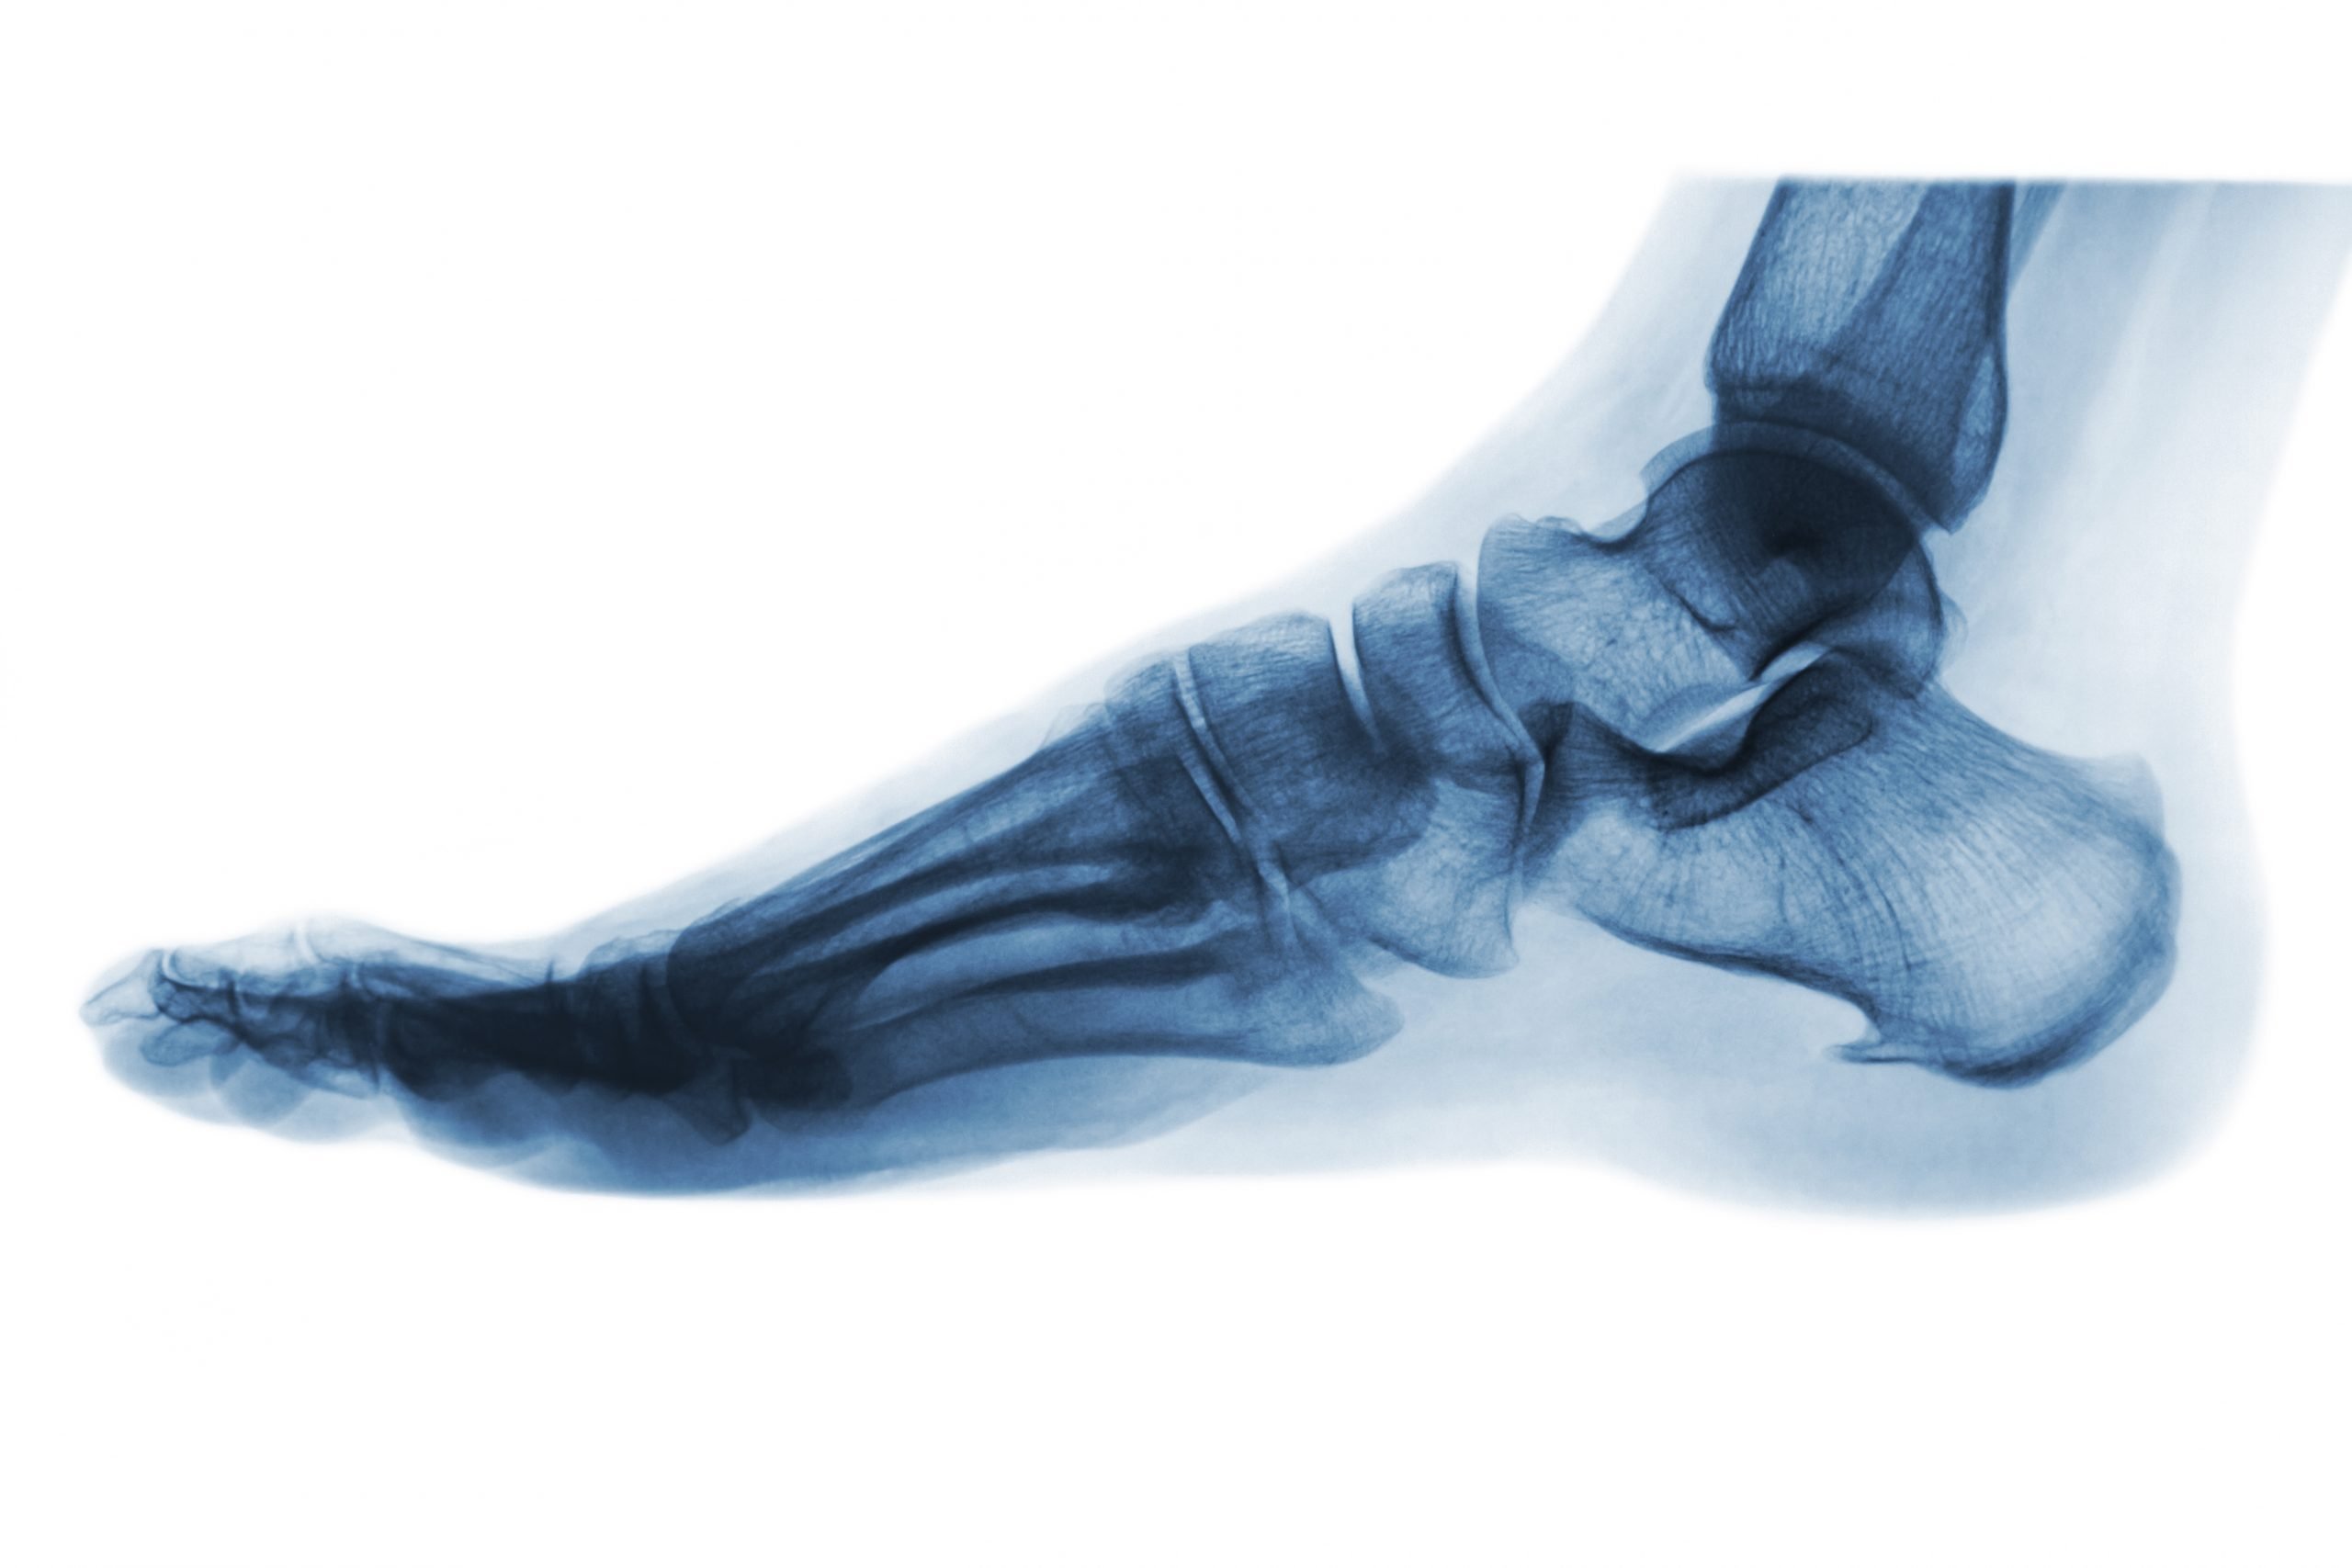 Foot and Ankle - Ankle Tightrope - AOA Orthopedic Specialists